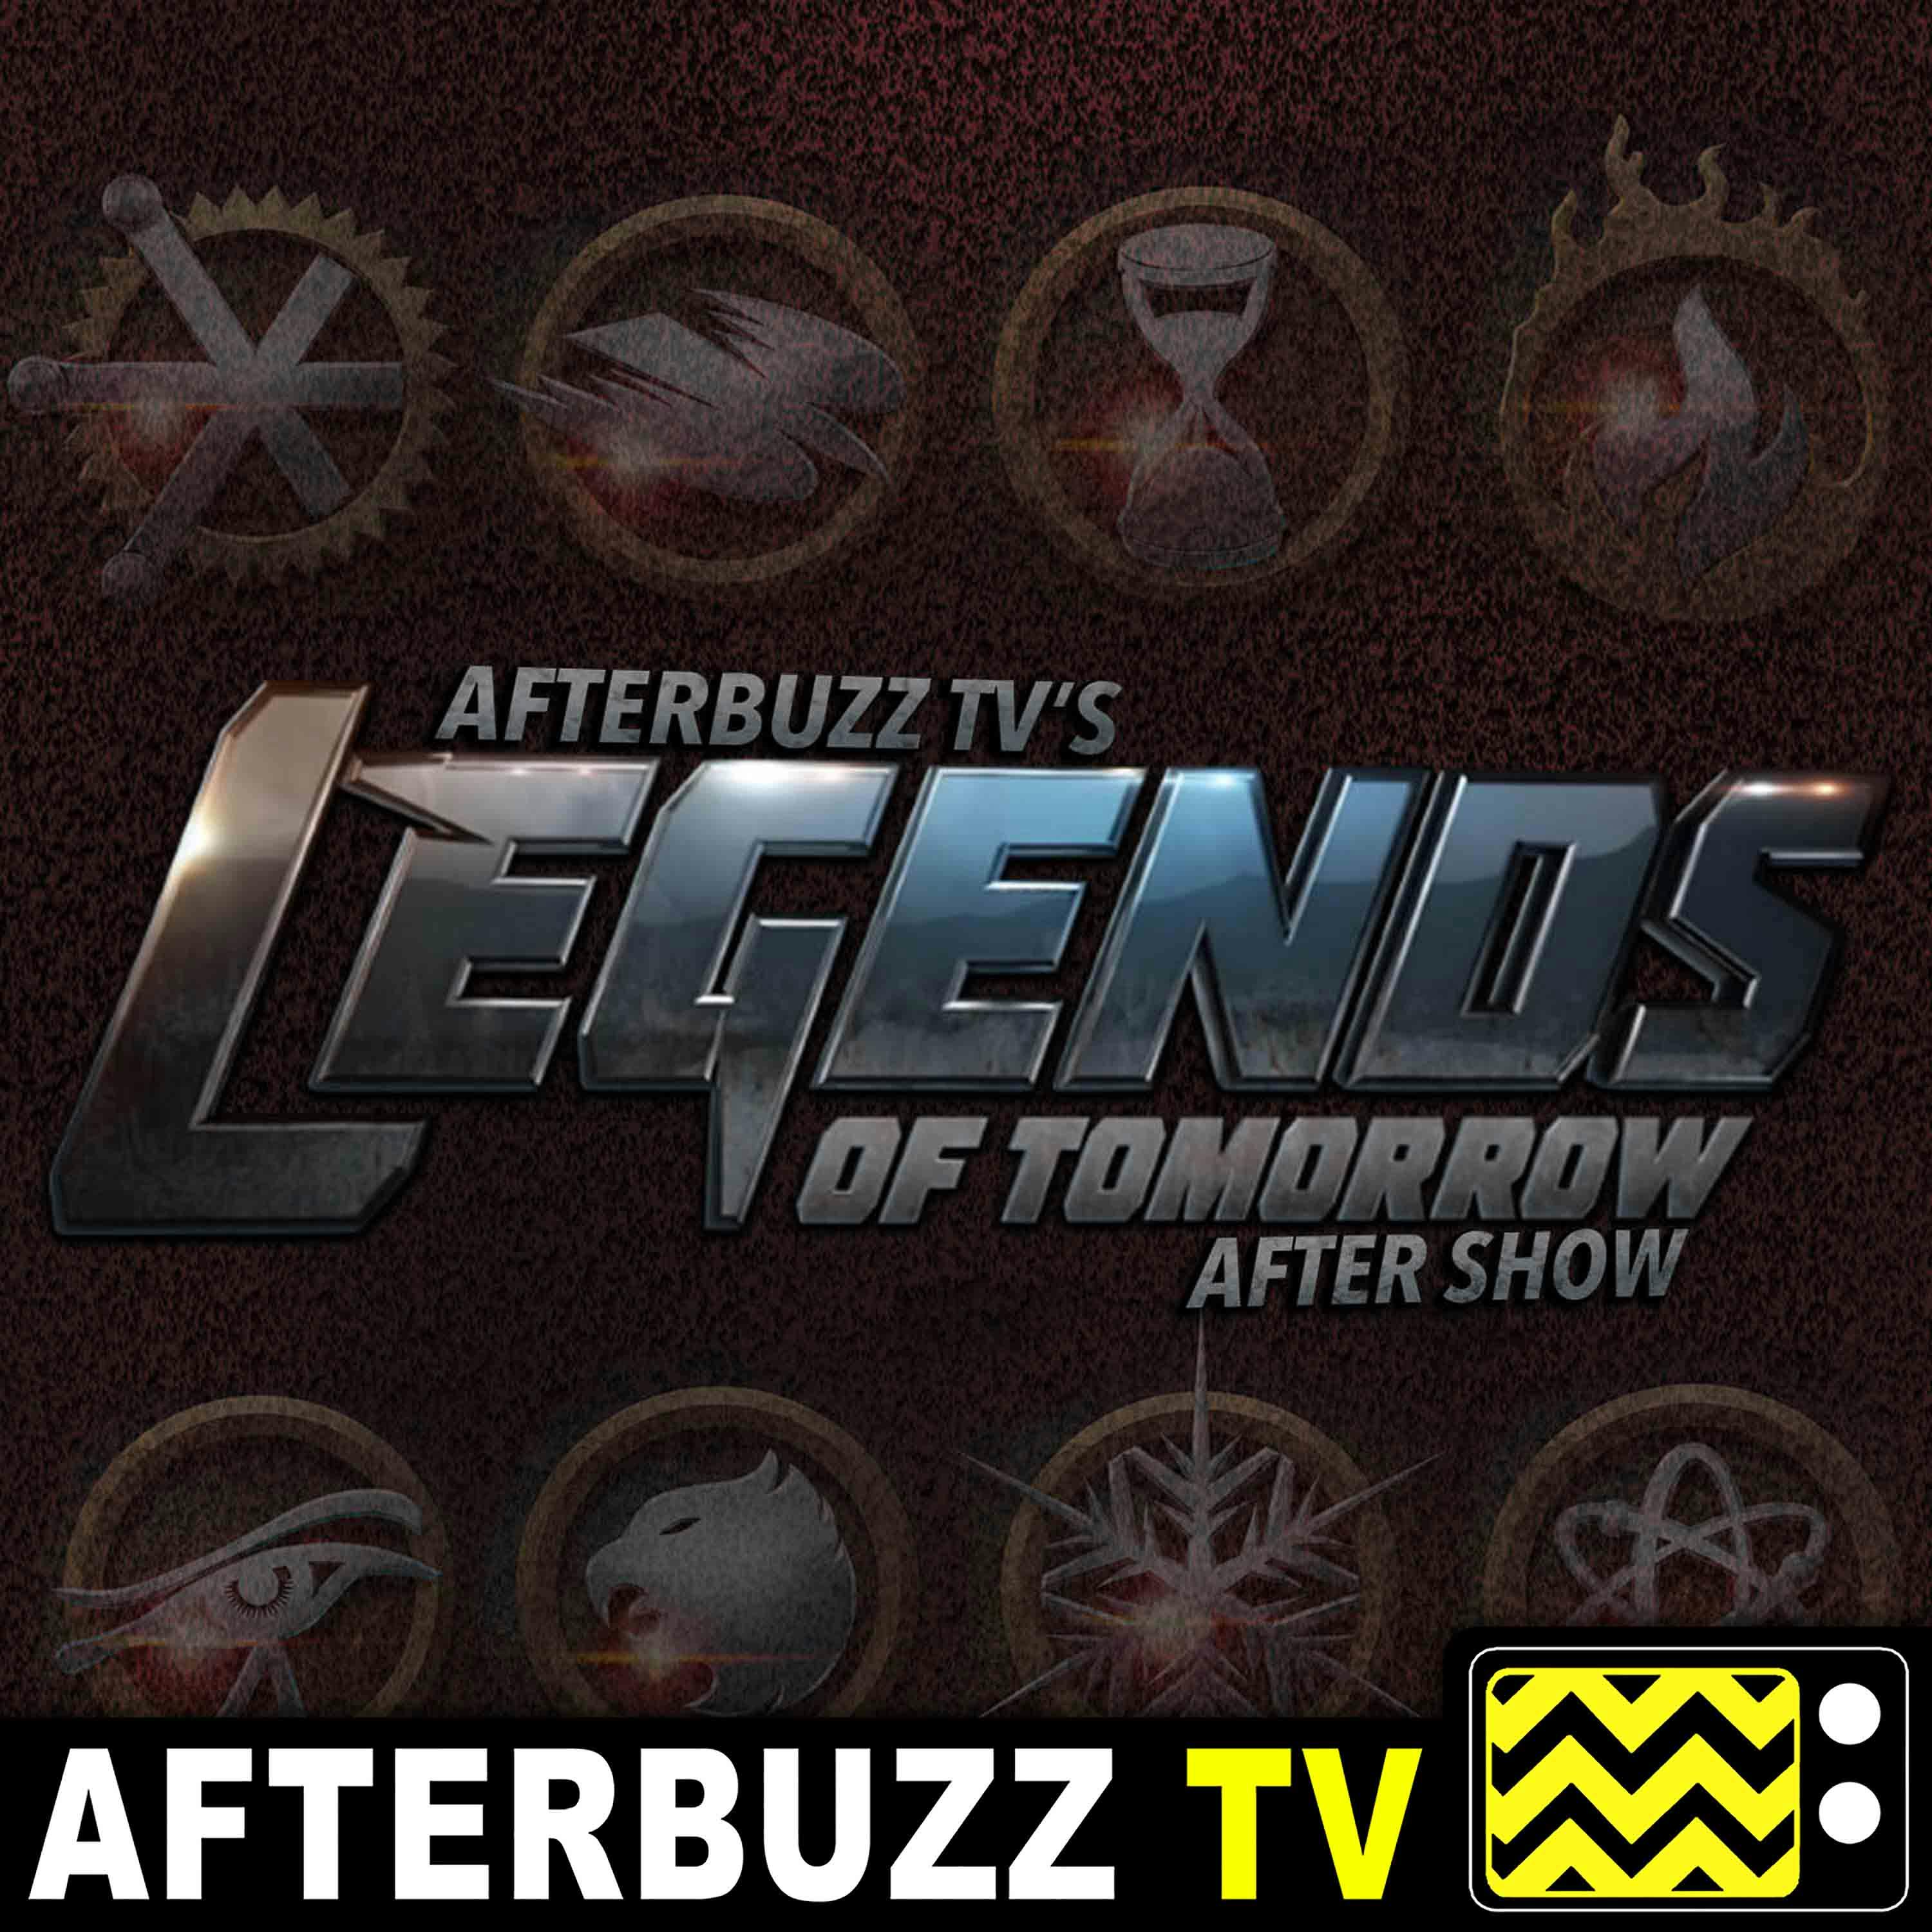 Legends Of Tomorrow S:3 | Helen Hunt E:6 | AfterBuzz TV AfterShow